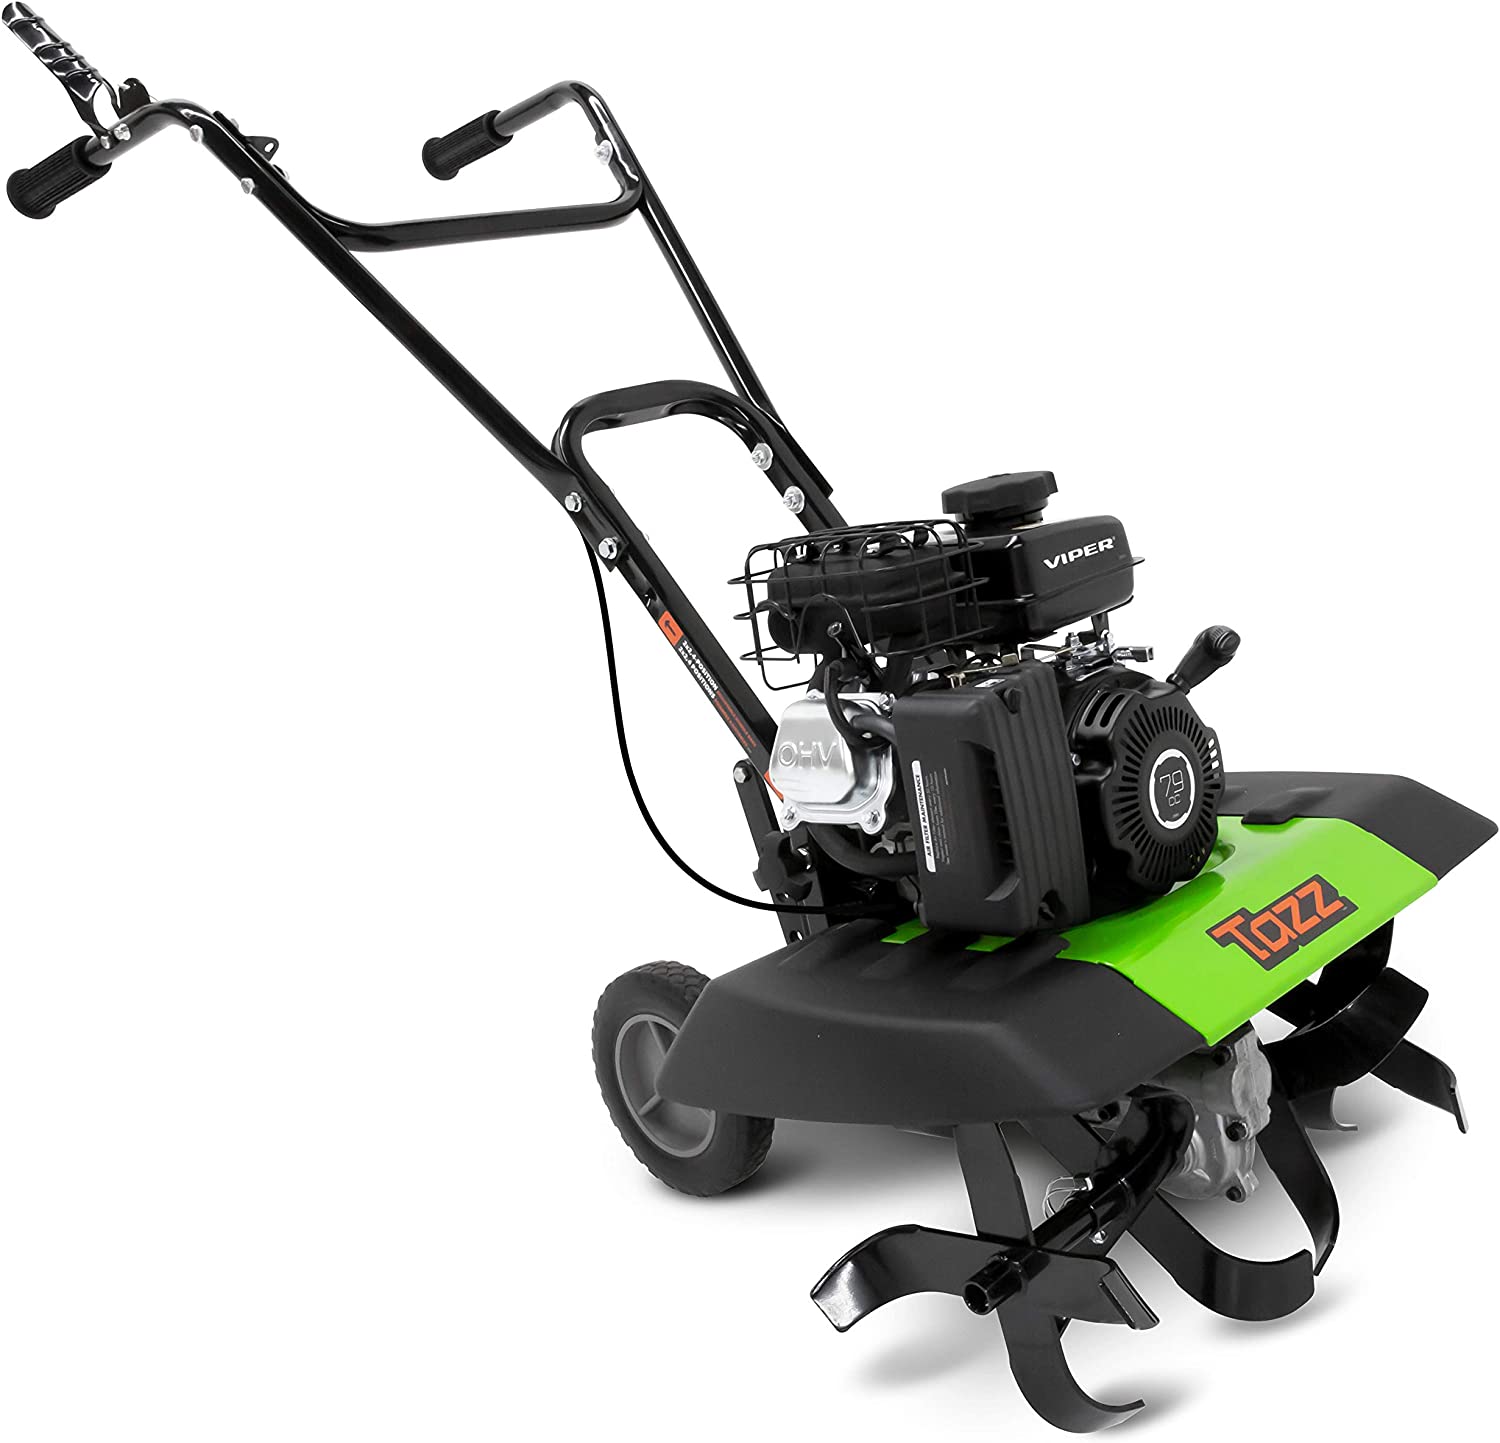 Tazz 35310 2-in-1 Front Tine Tiller/Cultivator, 79cc 4-Cycle Viper Engine, Gear Drive Transmission, Forged Steel Tines, Multiple Tilling Widths of 11”, 16” & 21”, Toolless Removable Side Shields,Green